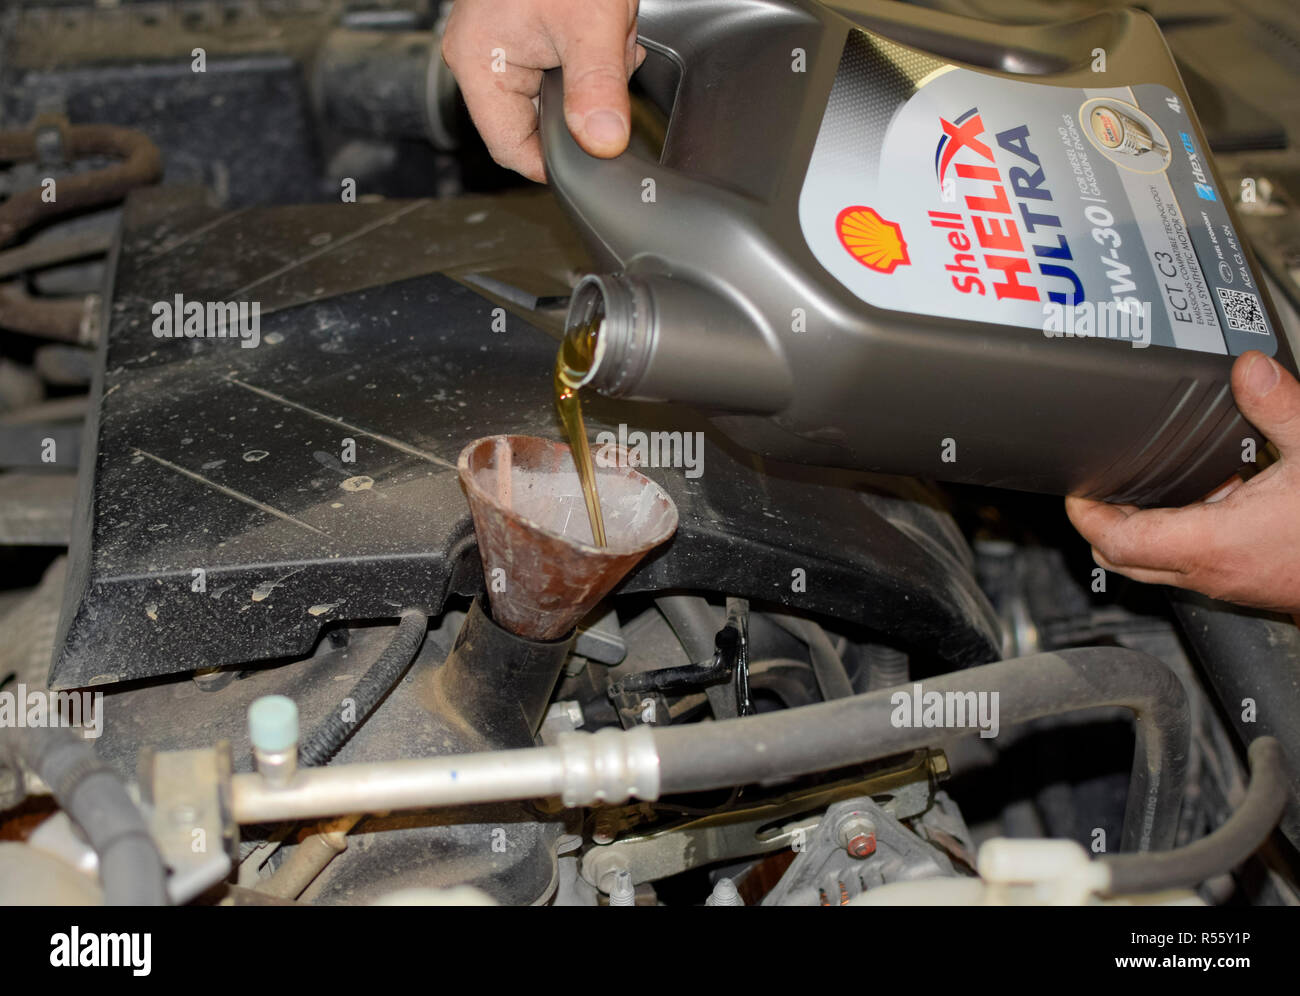 Oil change in the engine of the car. Filling the oil through the funnel. Car maintenance station. Stock Photo